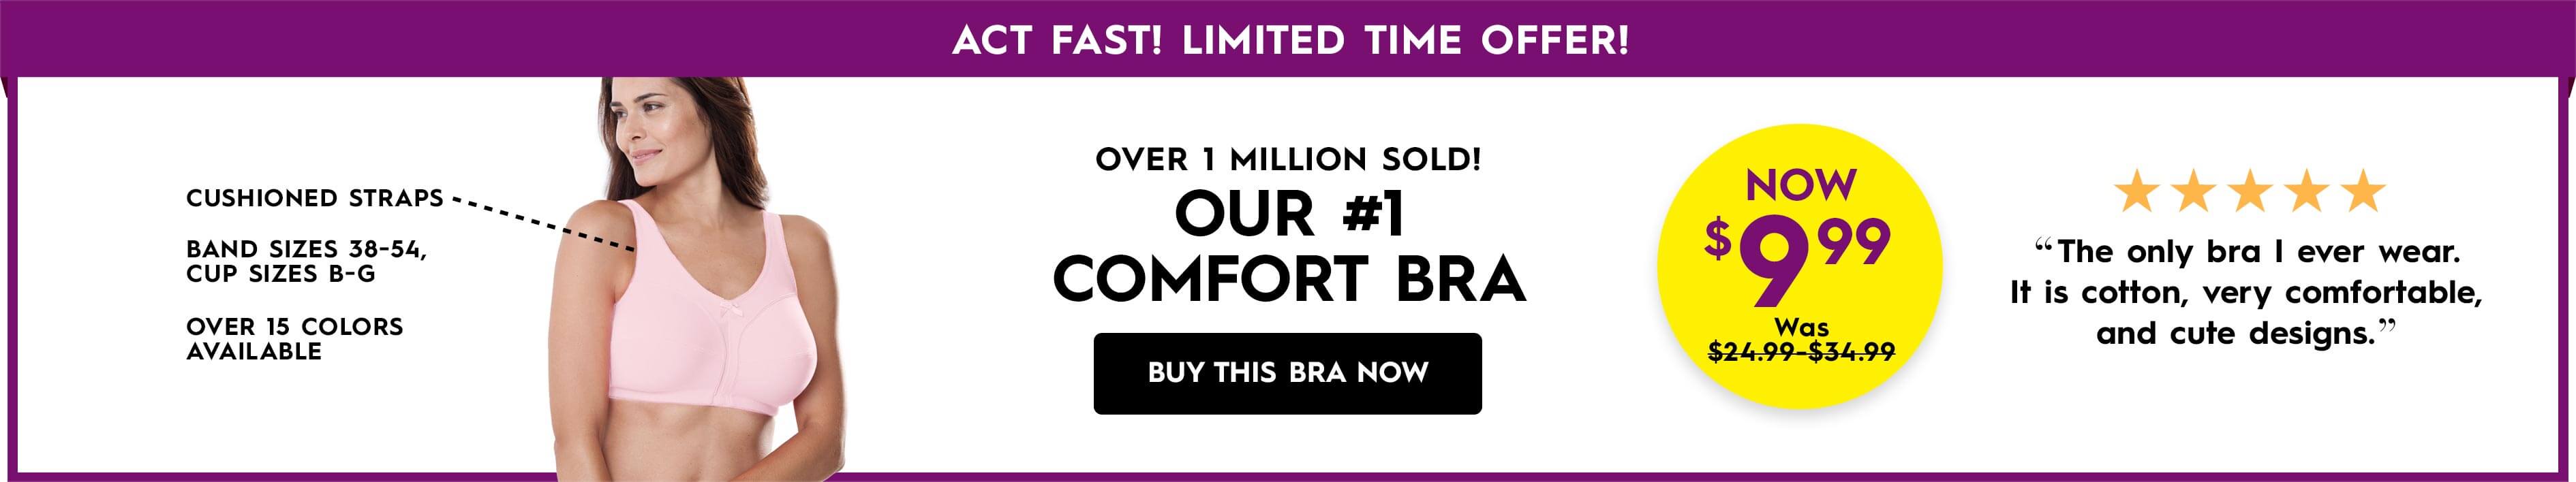 Cushioned, Straps, Band sizes 38-54, Cup size B-G, Over 15 colors. Over 1 Million Sold! Our #1 Comfort Bra. Now $9.99, was $24.99. - Buy this Bra Now 